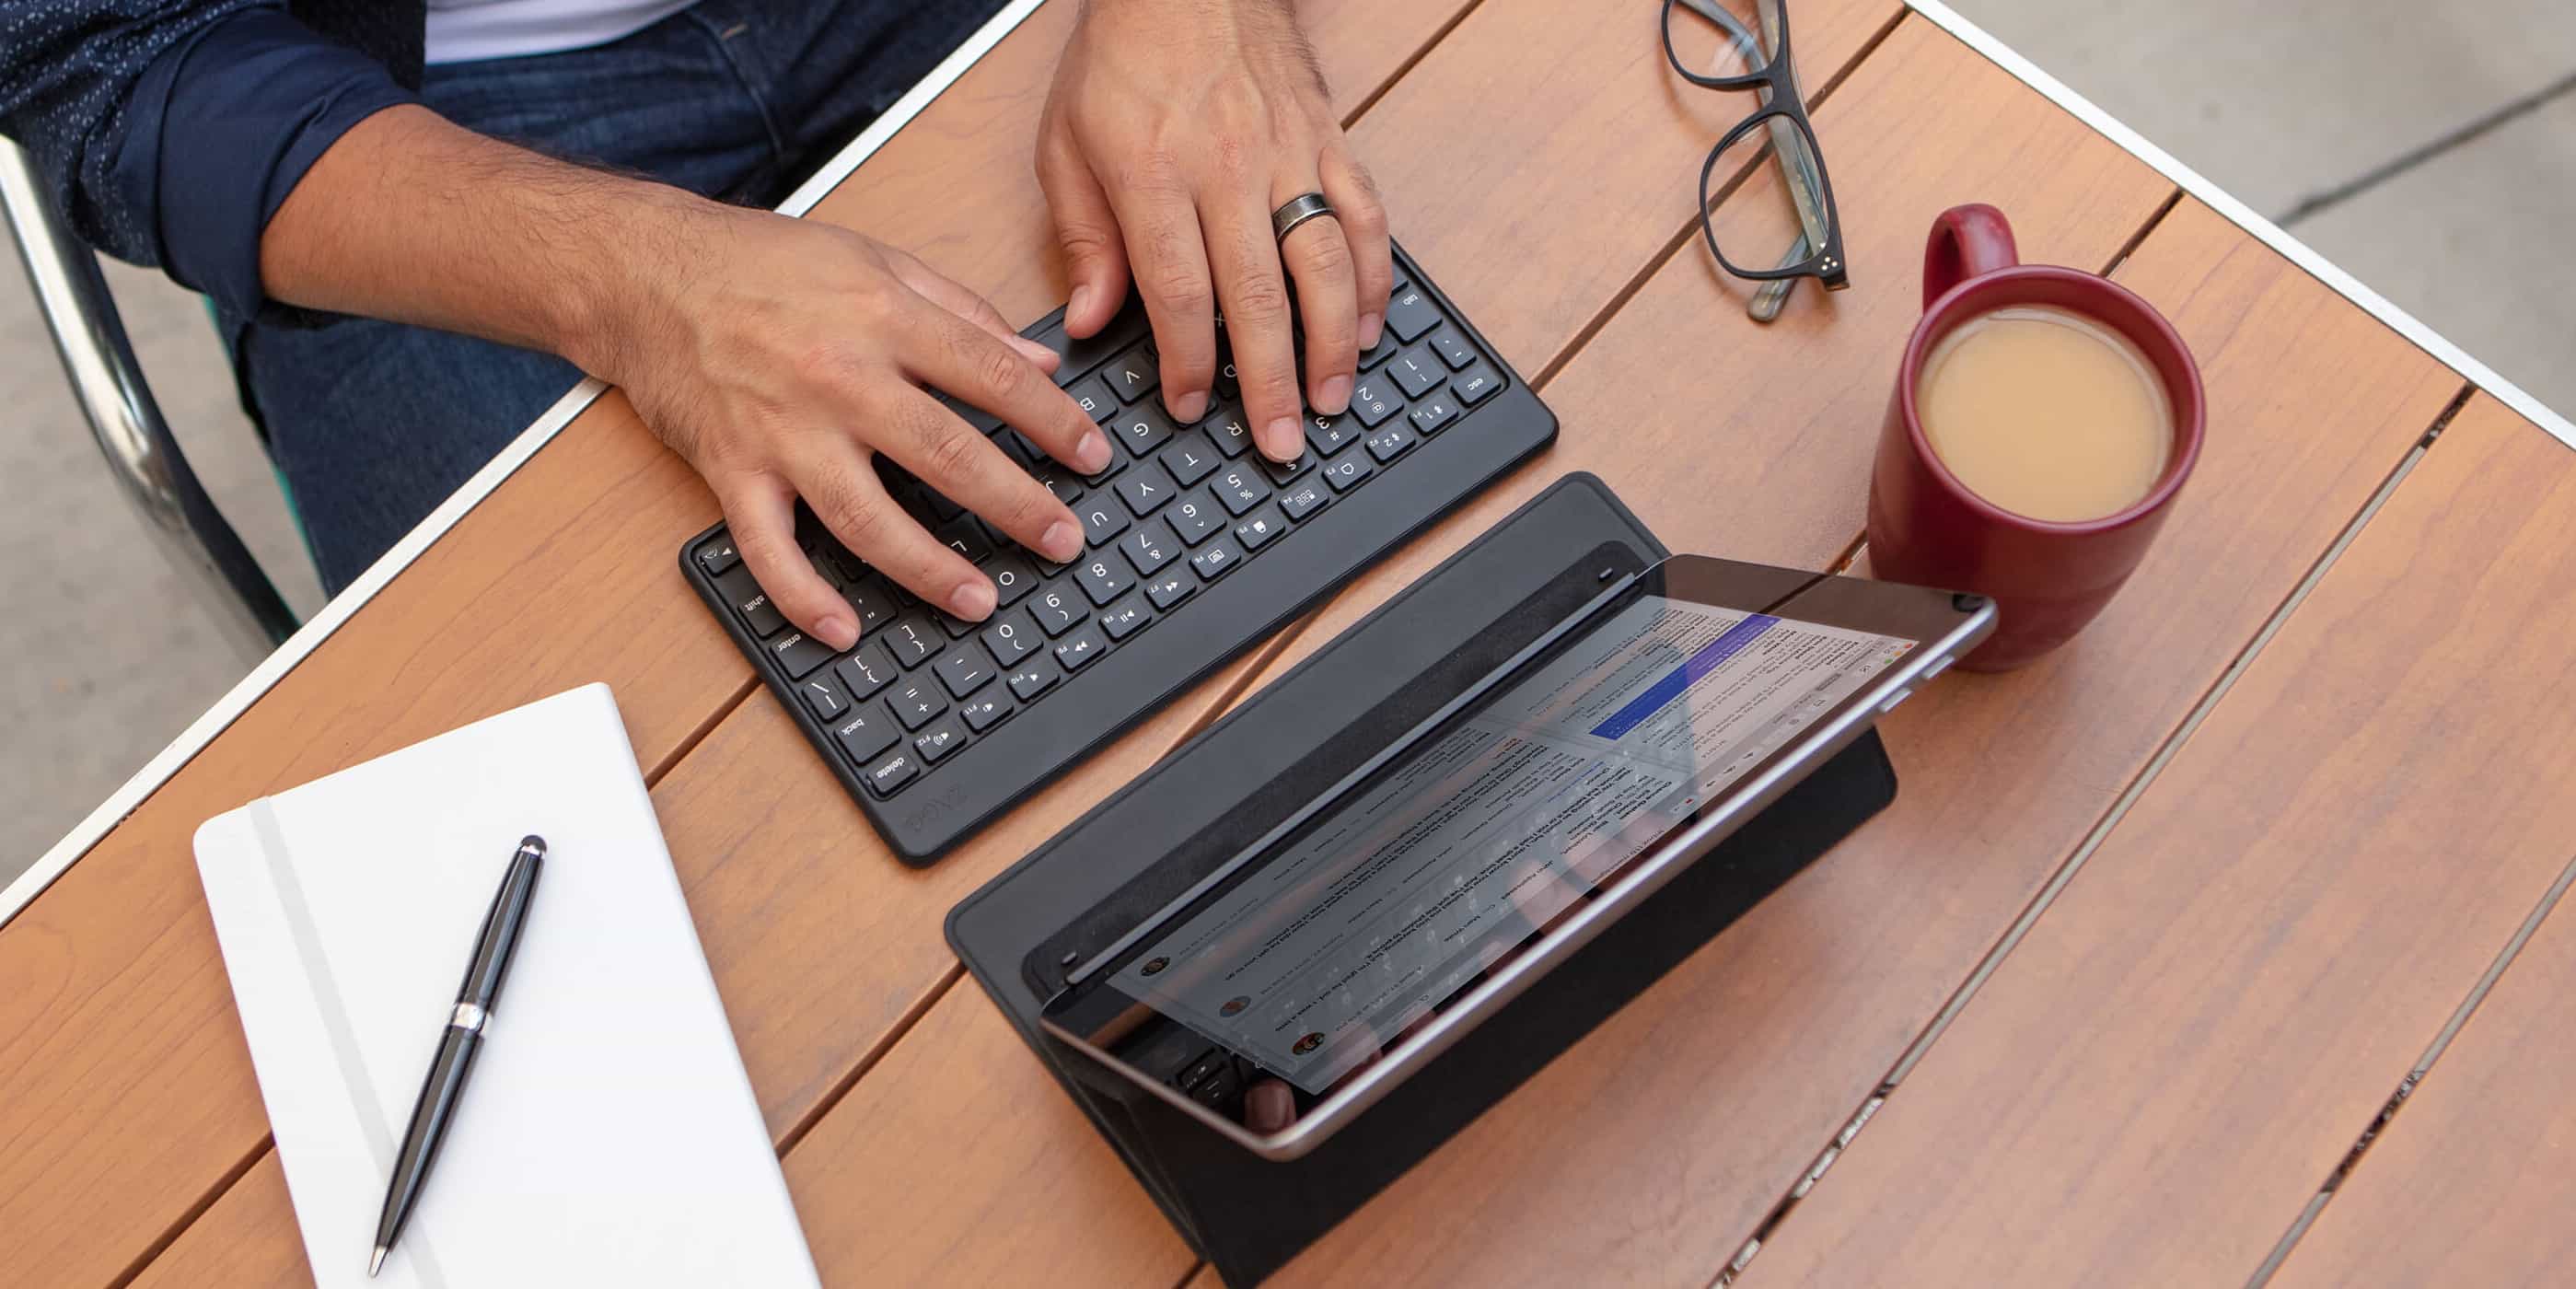 Touch type on your iPad or iPhone with the Zagg Flex universal keyboard.